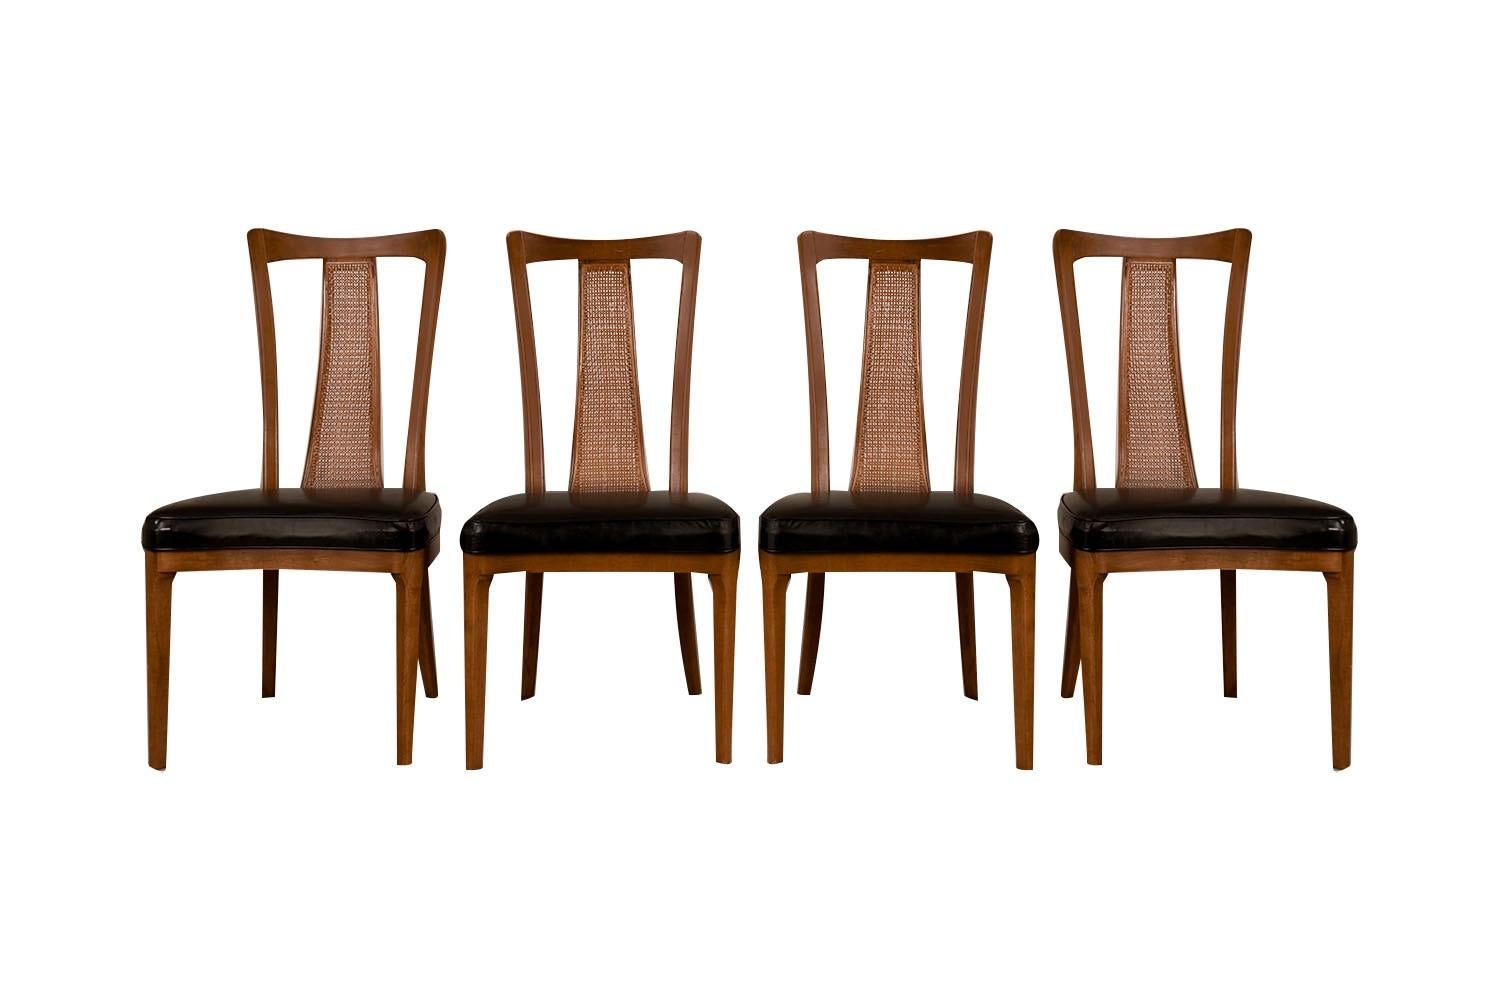 Stunning set of six beautiful Mid-Century Modern Walnut dining chairs, two armchairs and four side chairs. The beautiful walnut frames feature modern styling with a distinct beautiful design. Sculpturally carved caned high backrests with tapered